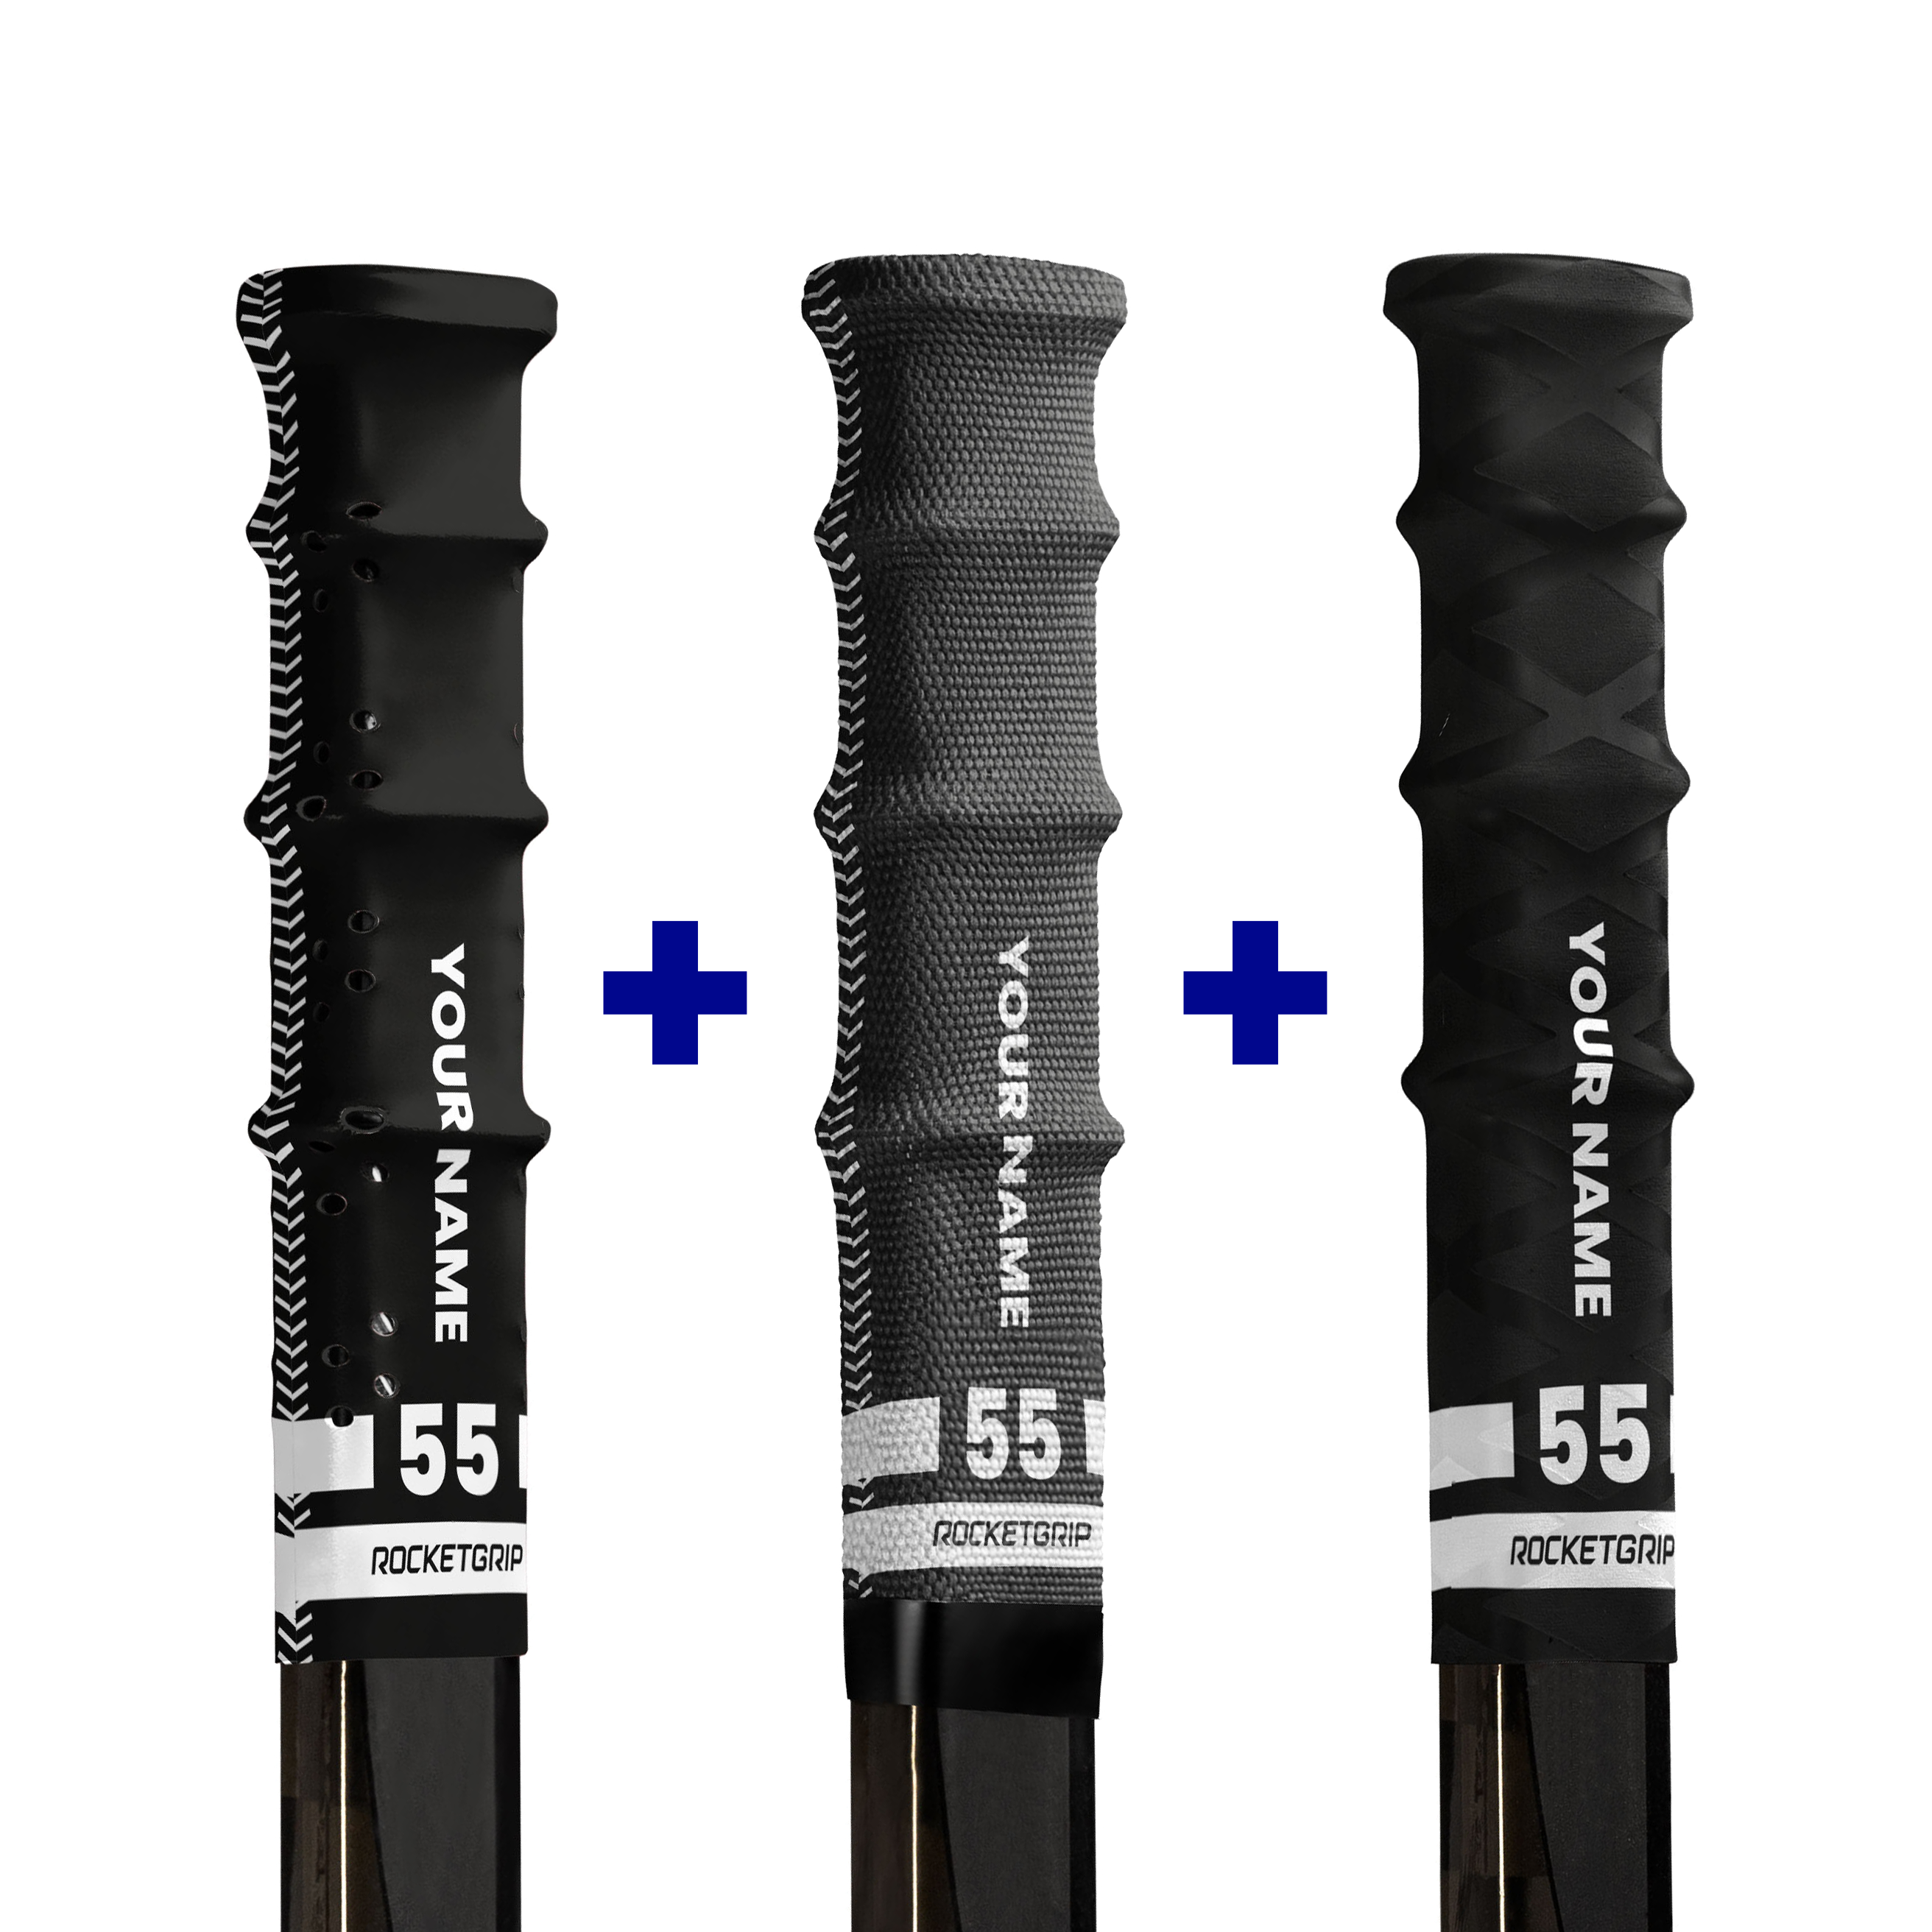 Starter-Pack Color Hockey Grips (3-pack) + Tackifier